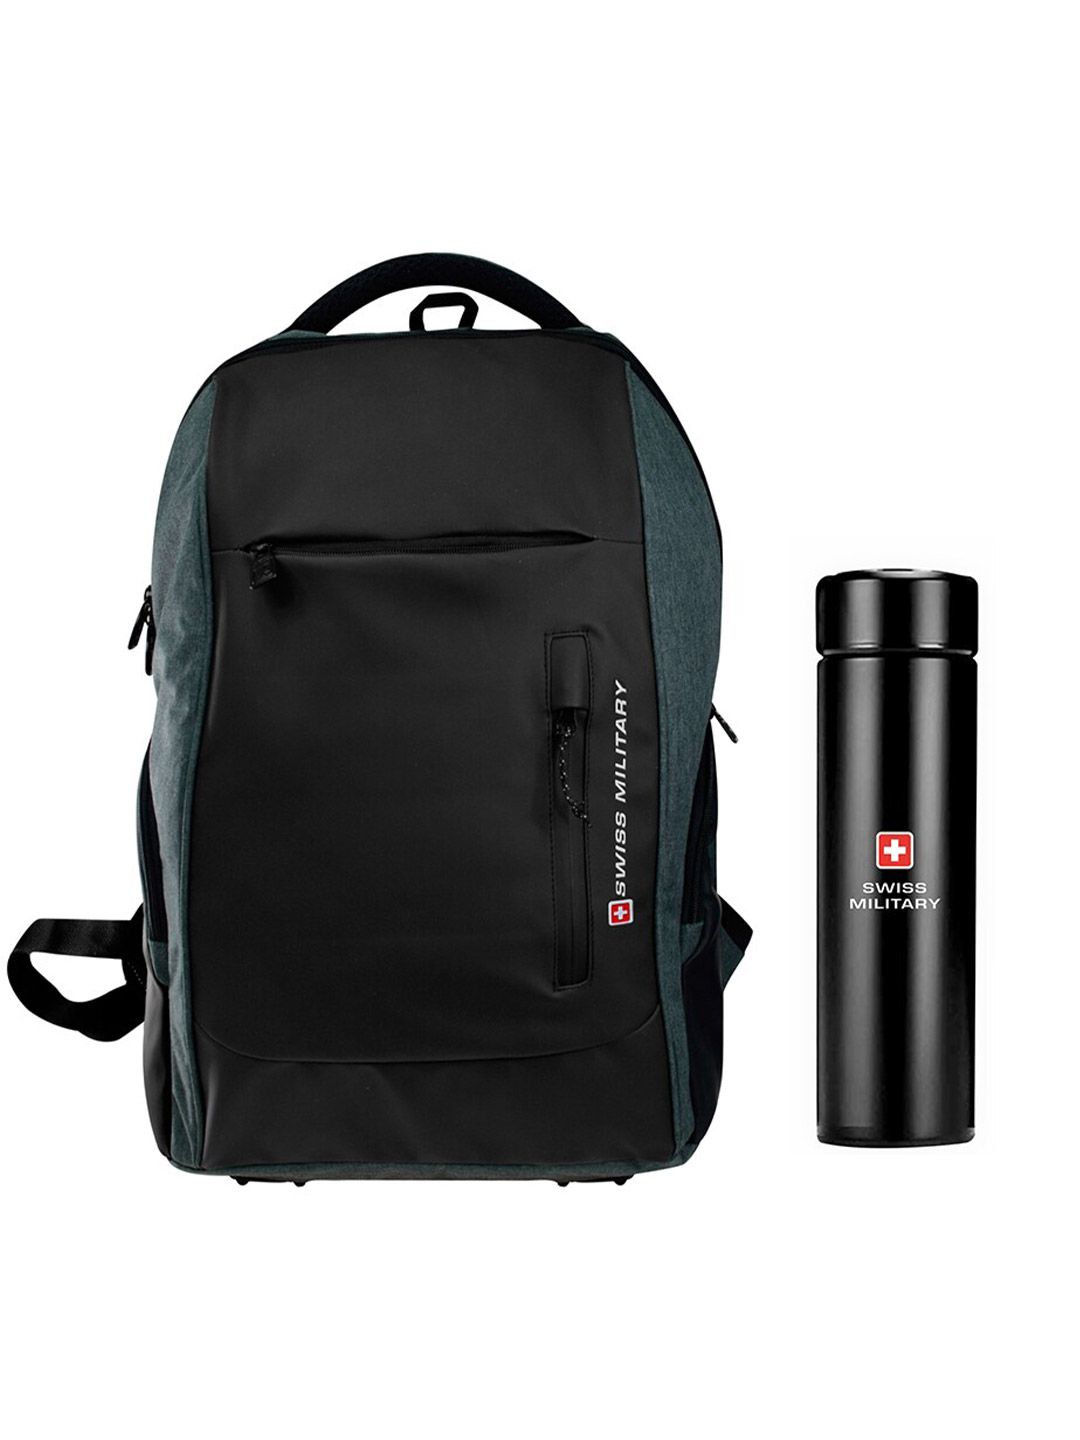 SWISS MILITARY Unisex Grey & Black USB Charging Port Backpack with Digital Vacuum Flask Price in India